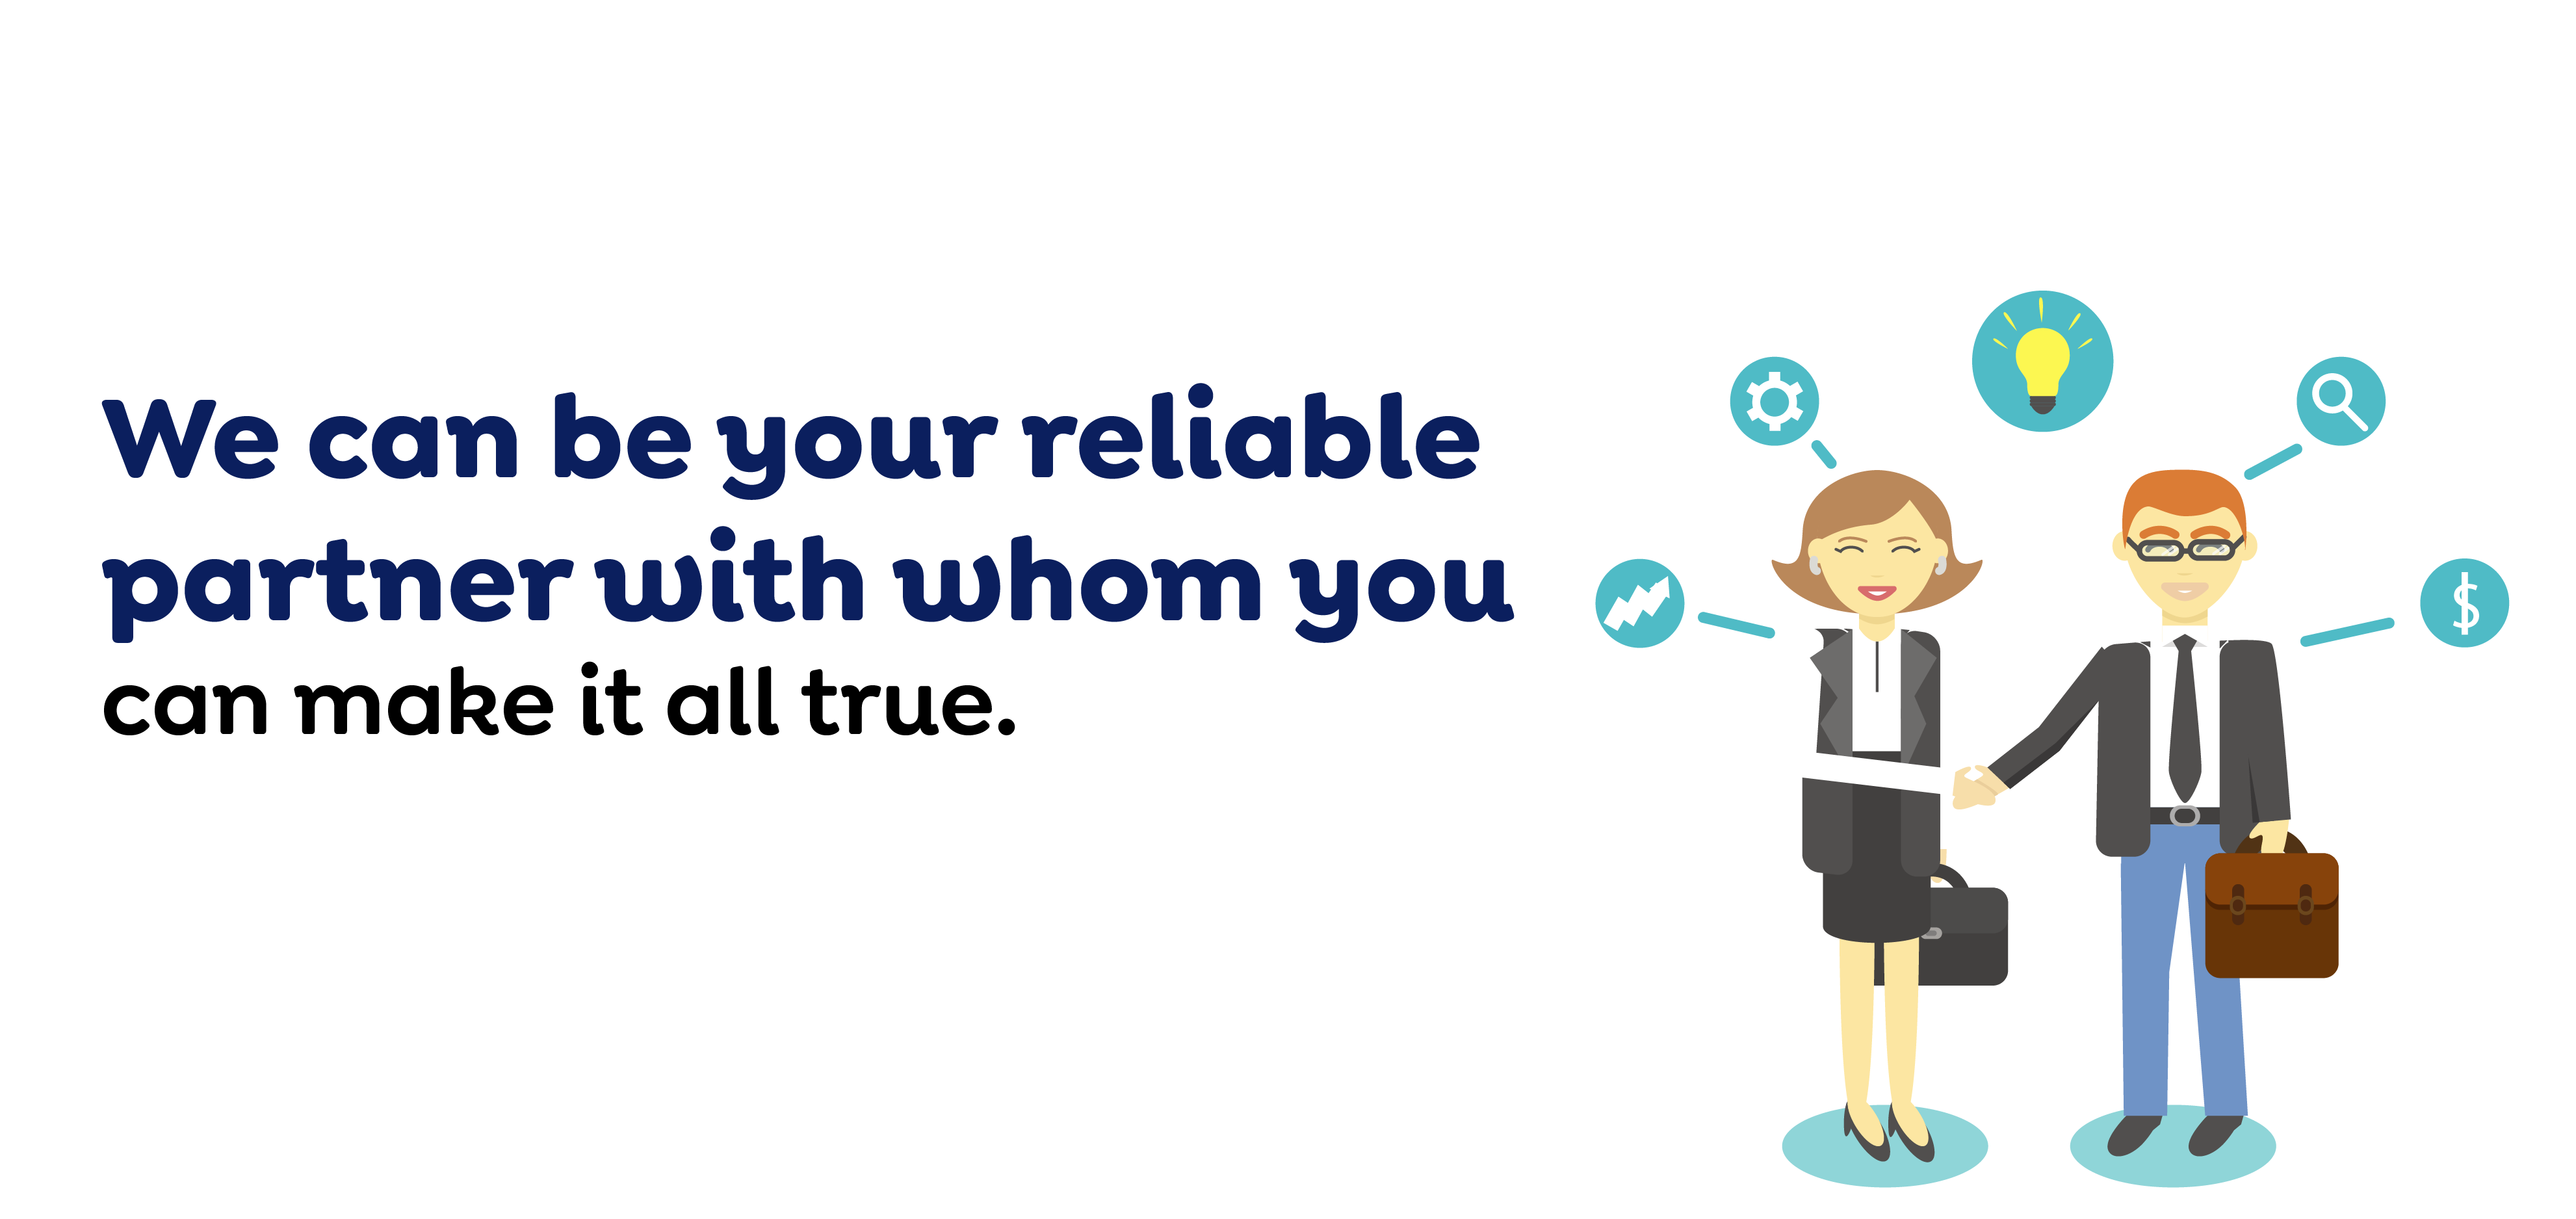 We can be your reliable partner with whom you can make it all true.